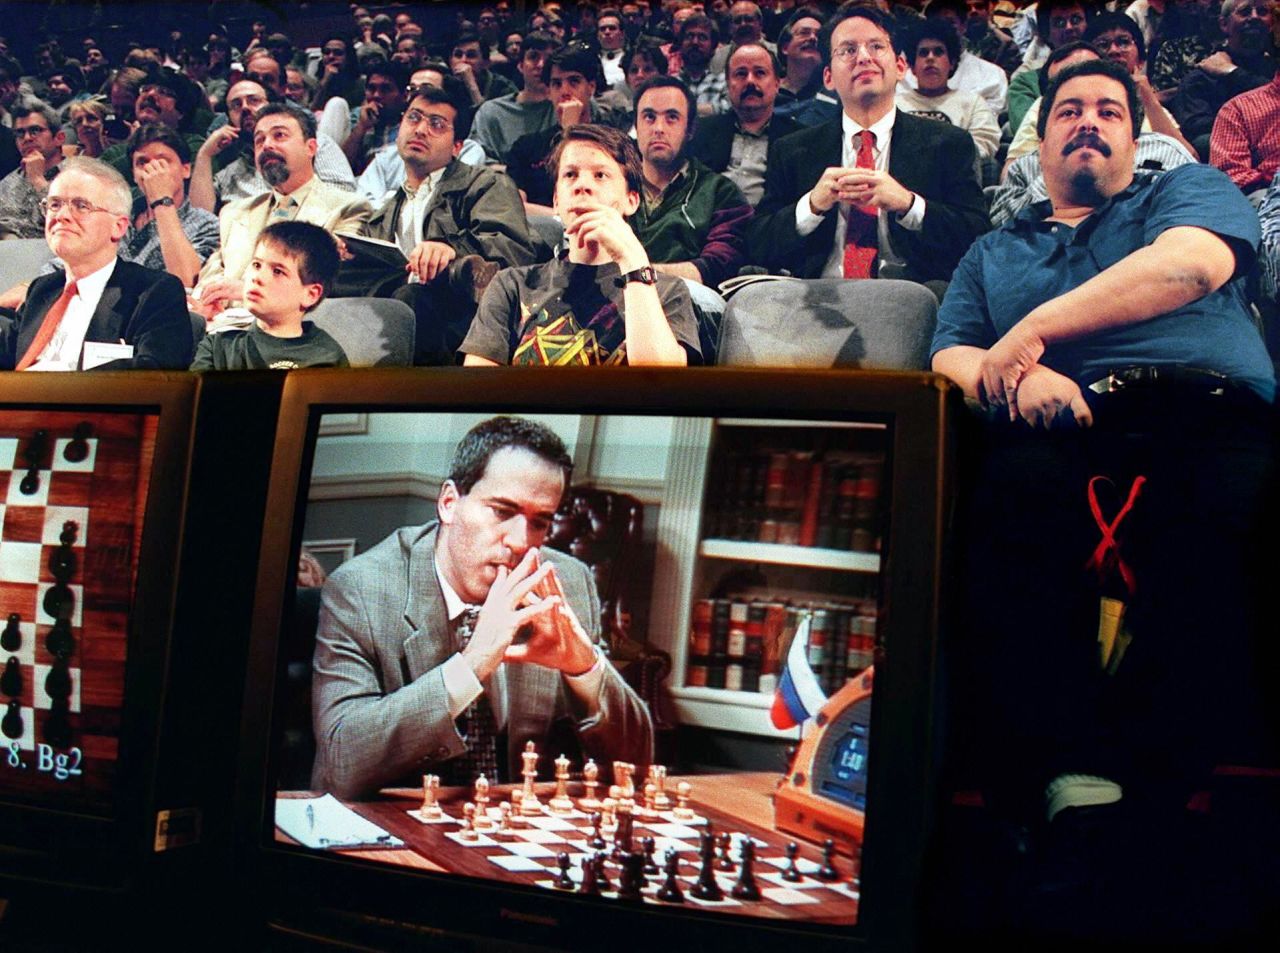 Deep Blue -- a chess-playing computer developed by IBM -- became the first piece of artificial intelligence to win both a chess game and a chess match against a reigning world champion, beating Kasparov in May 1997. Kasparov accused IBM of cheating and demanded a rematch, which IBM turned down and instead chose to retire Deep Blue.